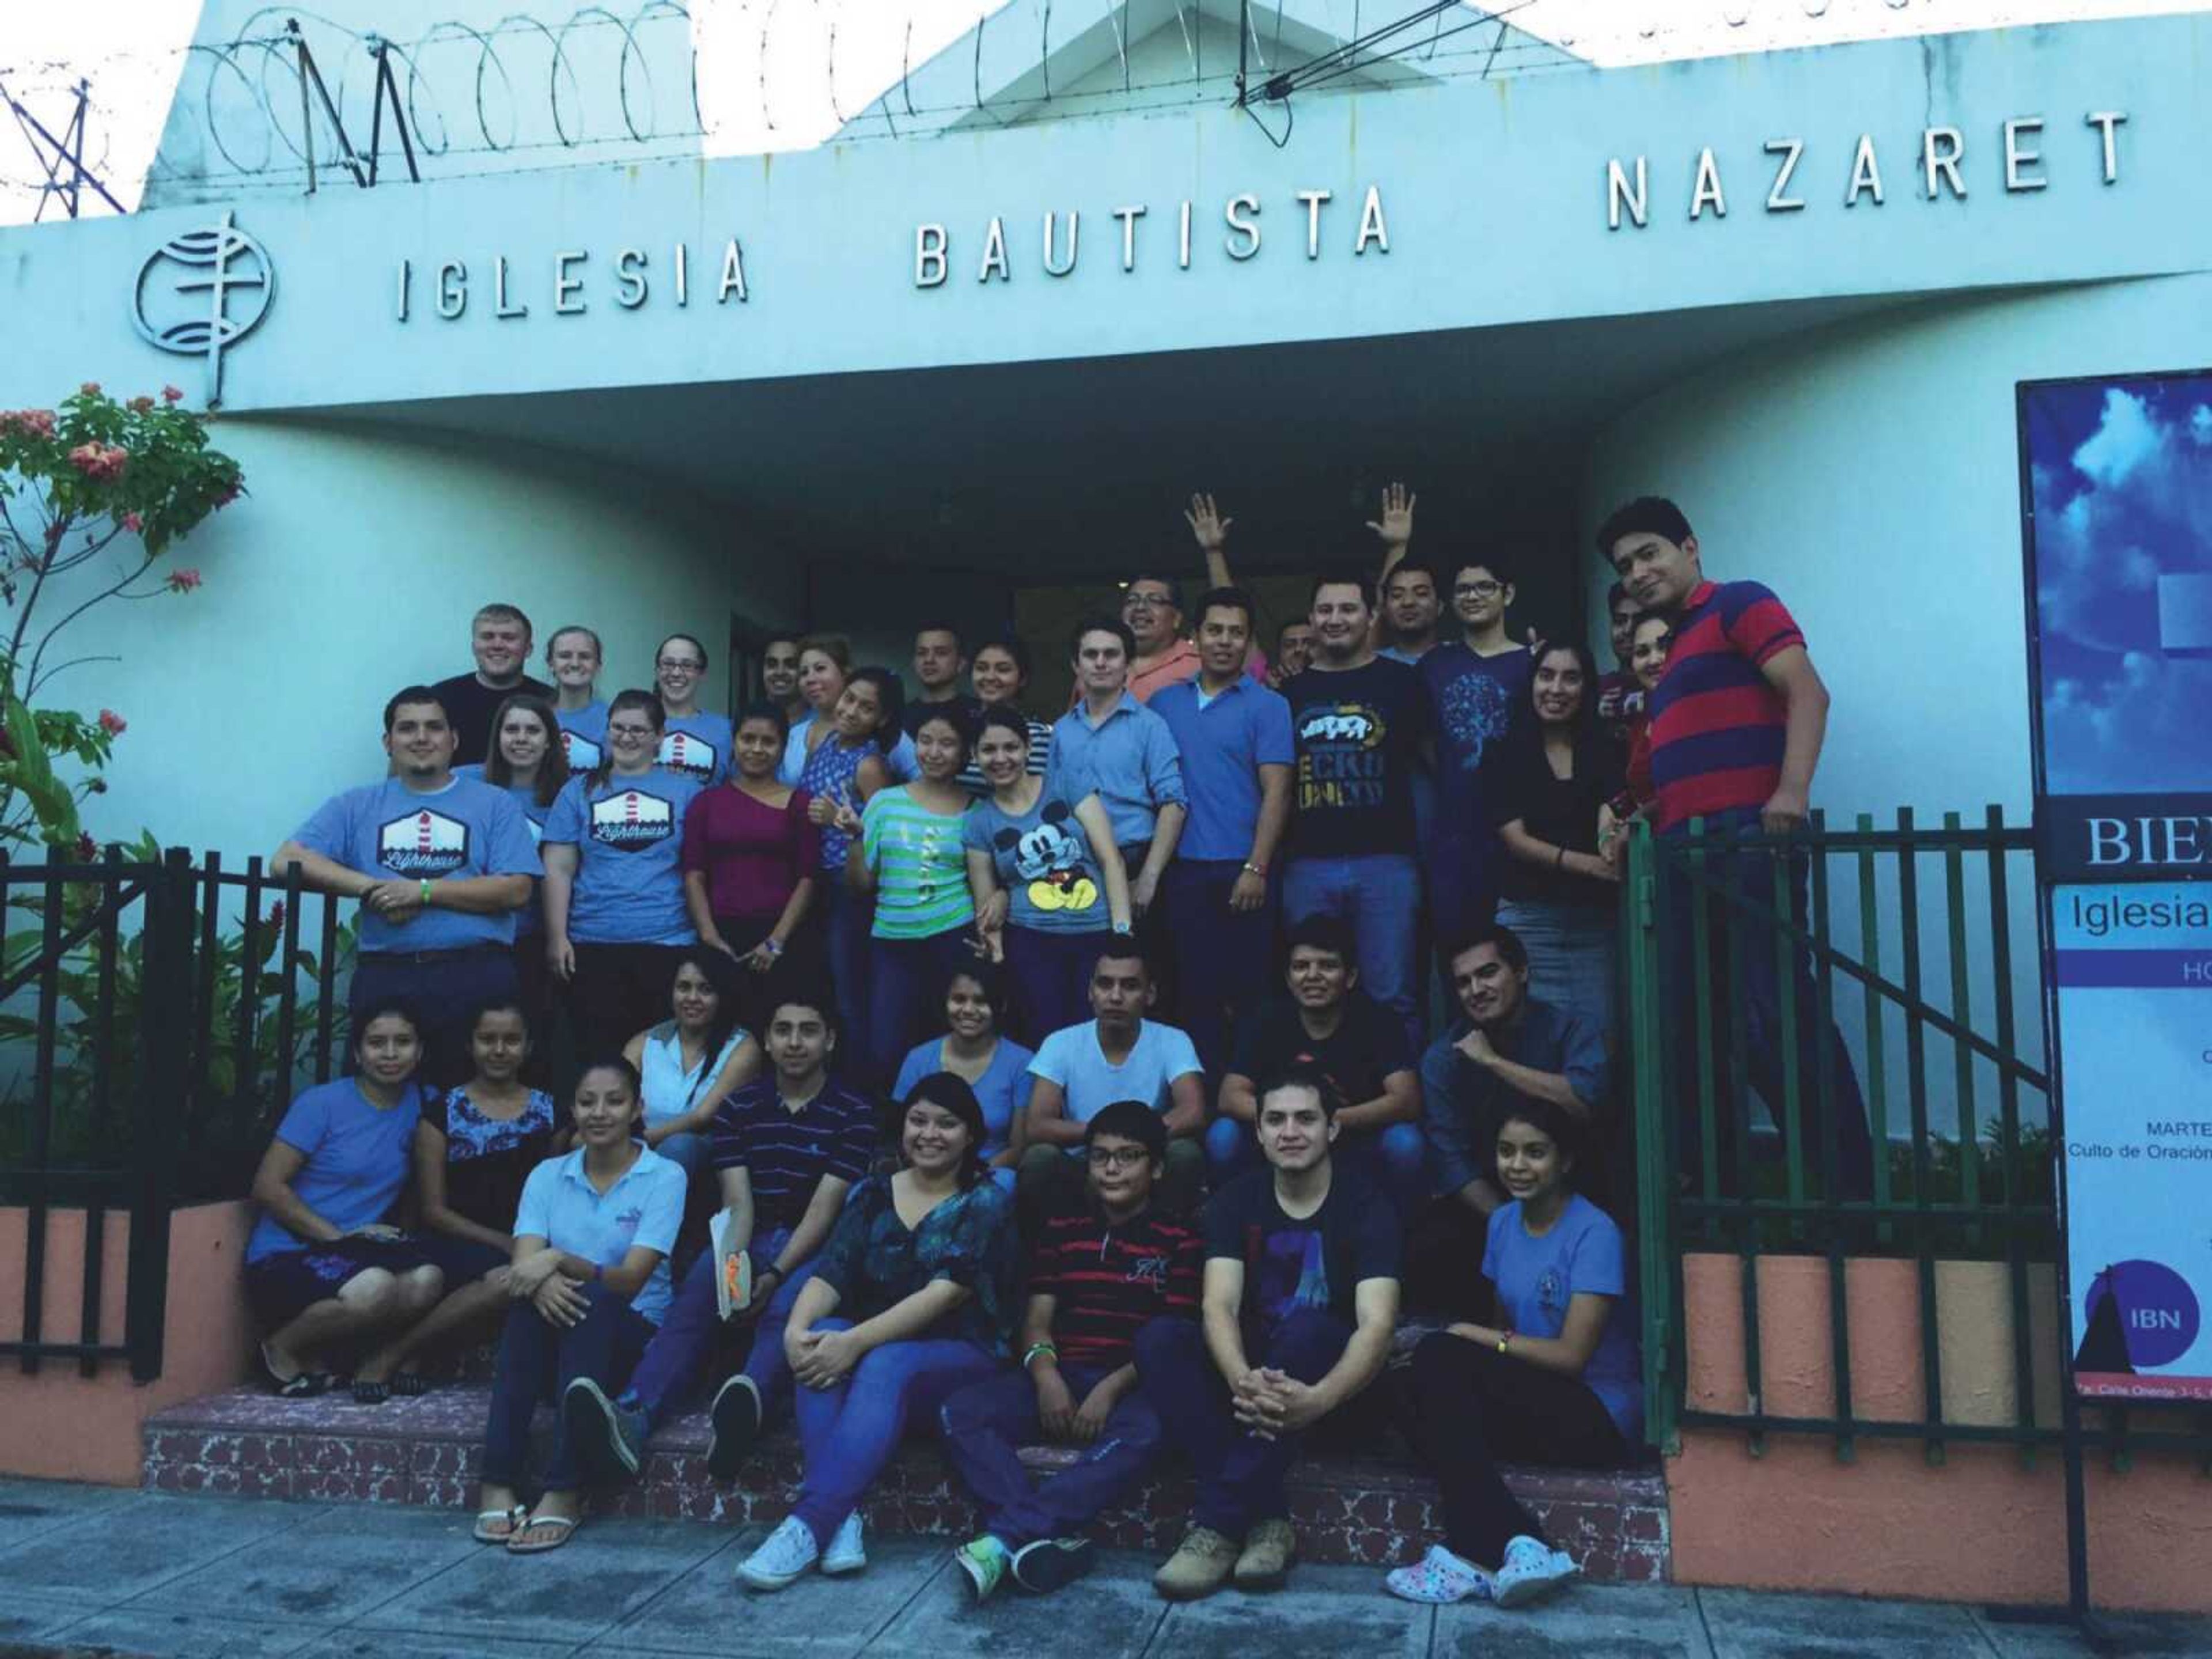 Members from The Lighthouse traveled to El Salvador over the summer and led a youth leadership congress.